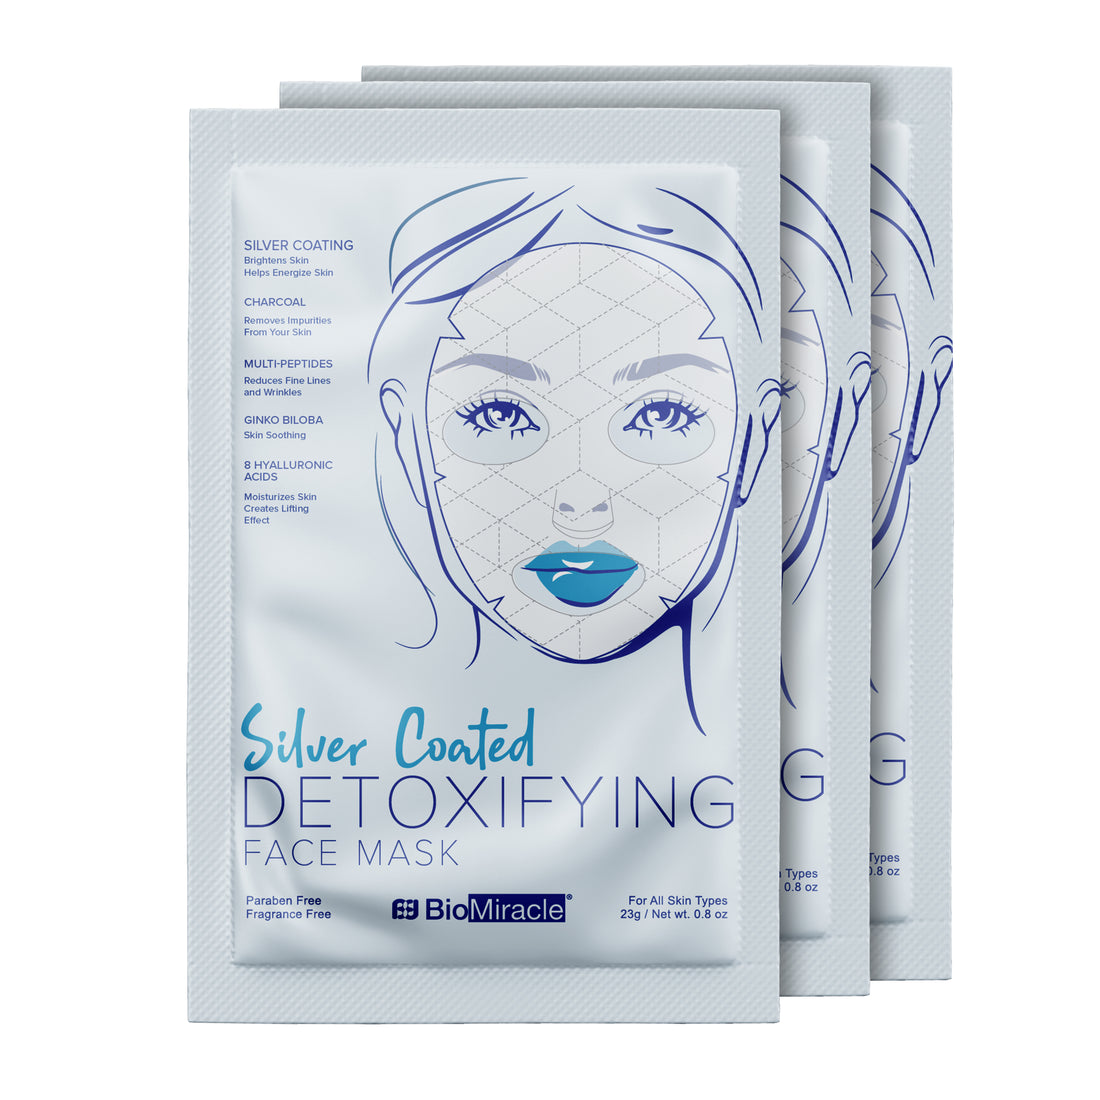 Silver Coated Detoxifying Face Mask 3 Pack